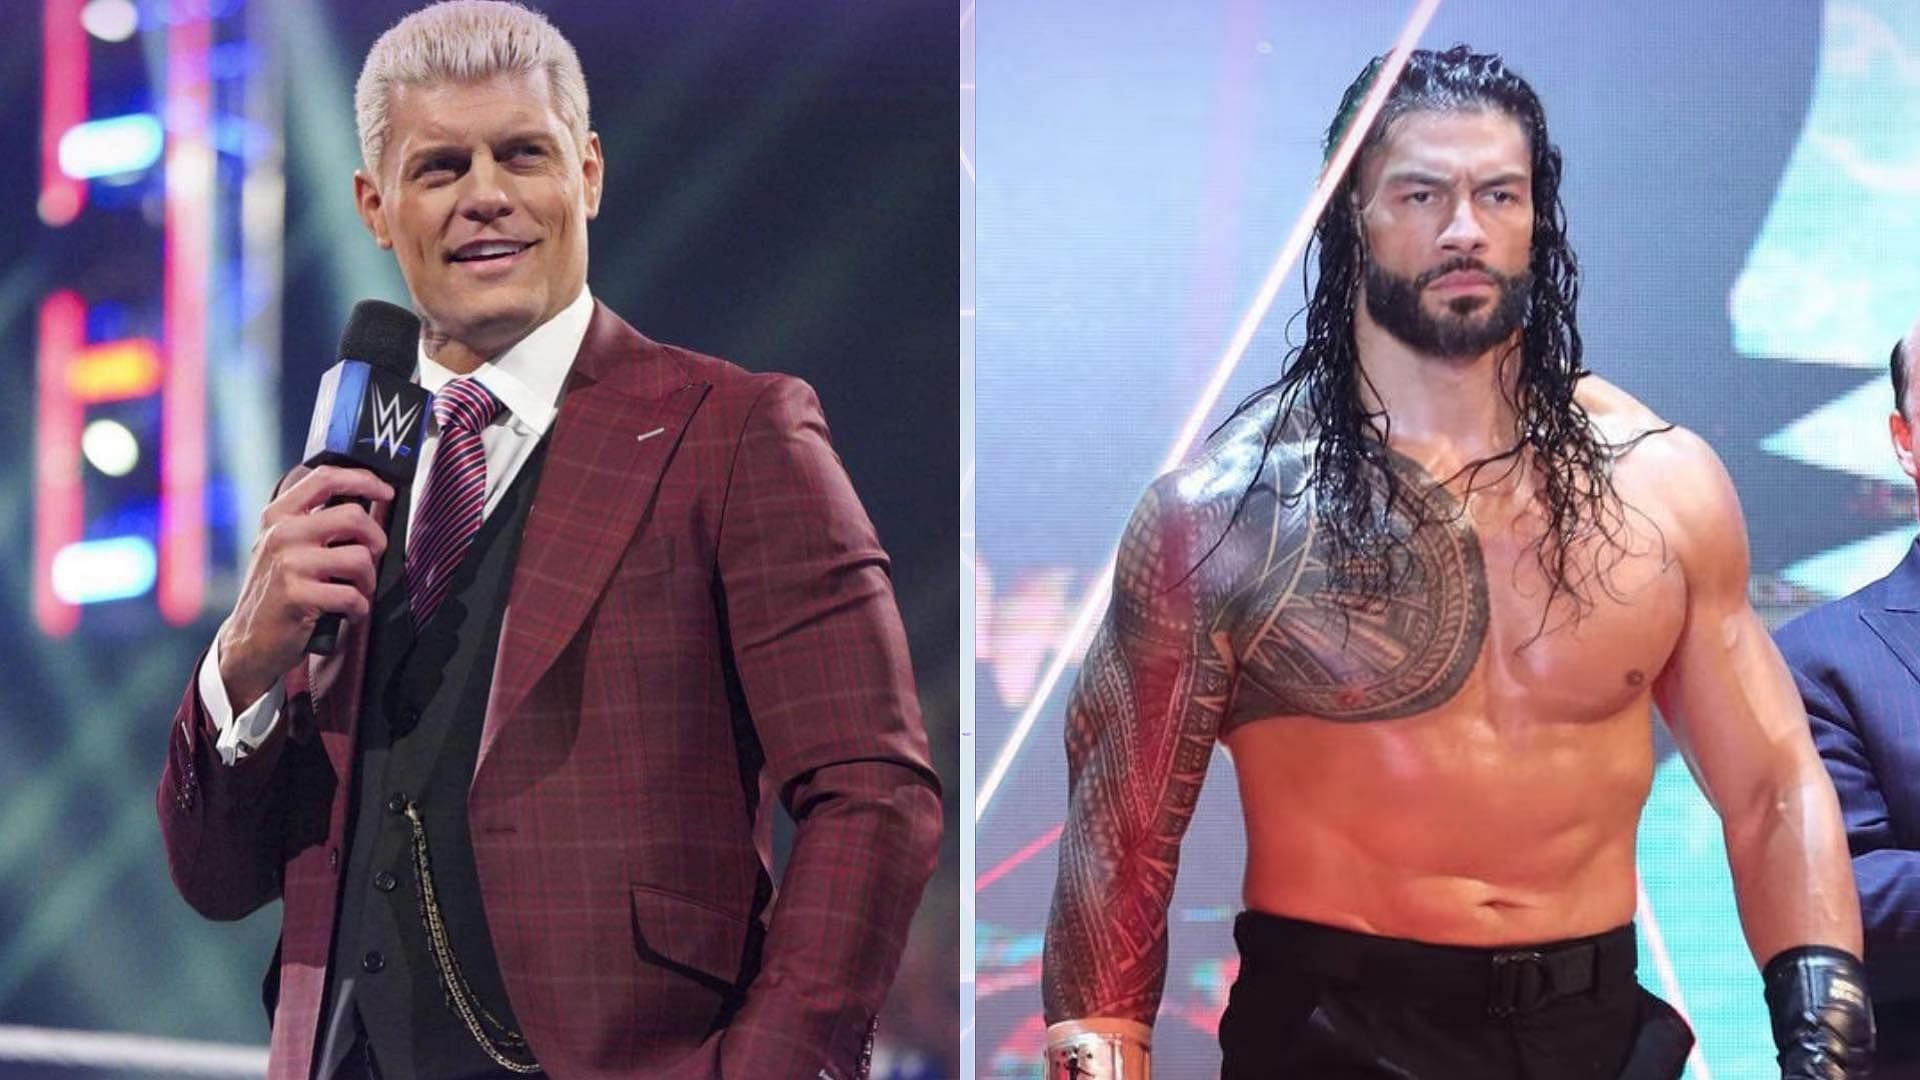 Cody Rhodes and Roman Reigns in picture